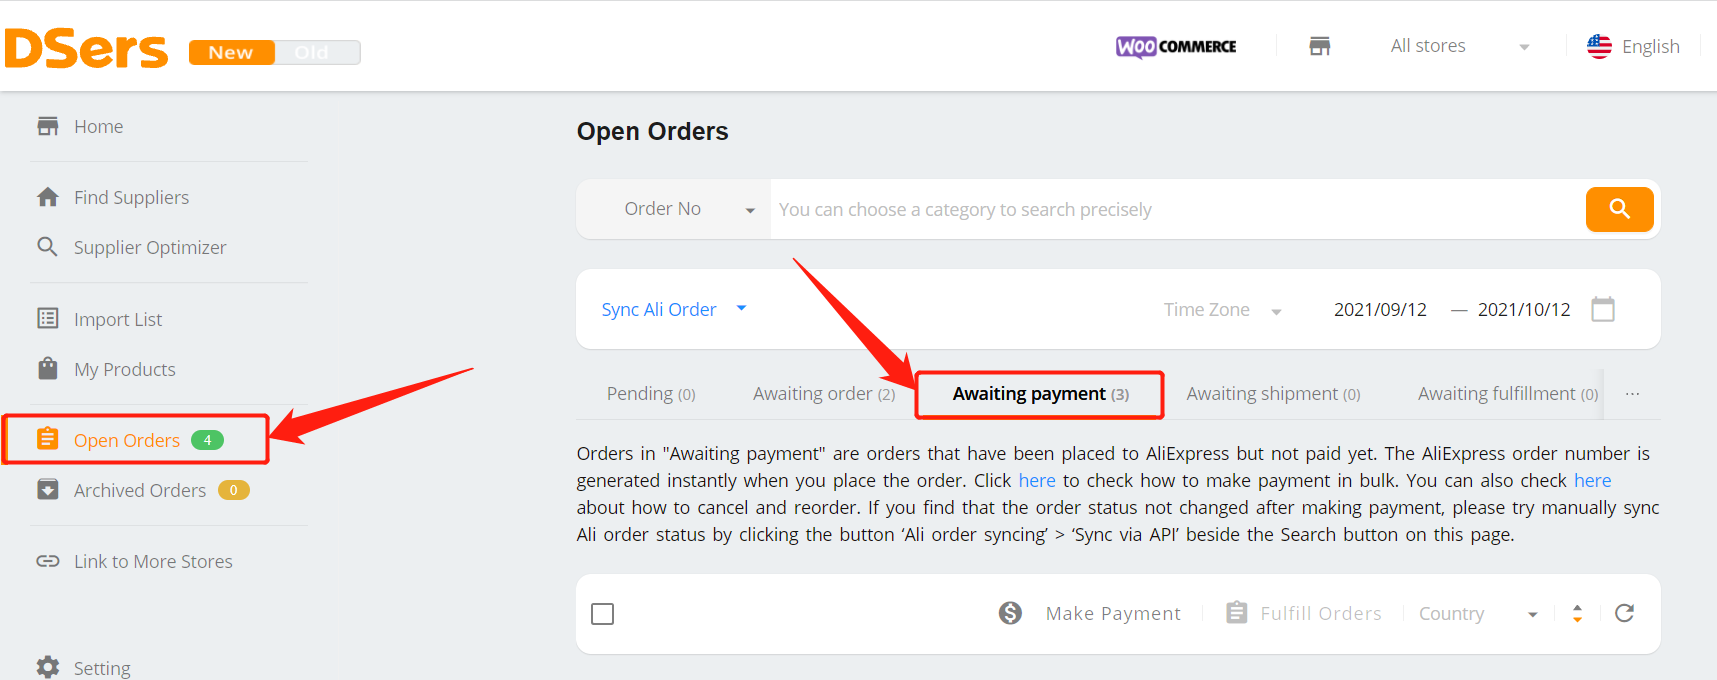 Pay multiple orders on AliExpress - Awaiting payment - Woo DSers